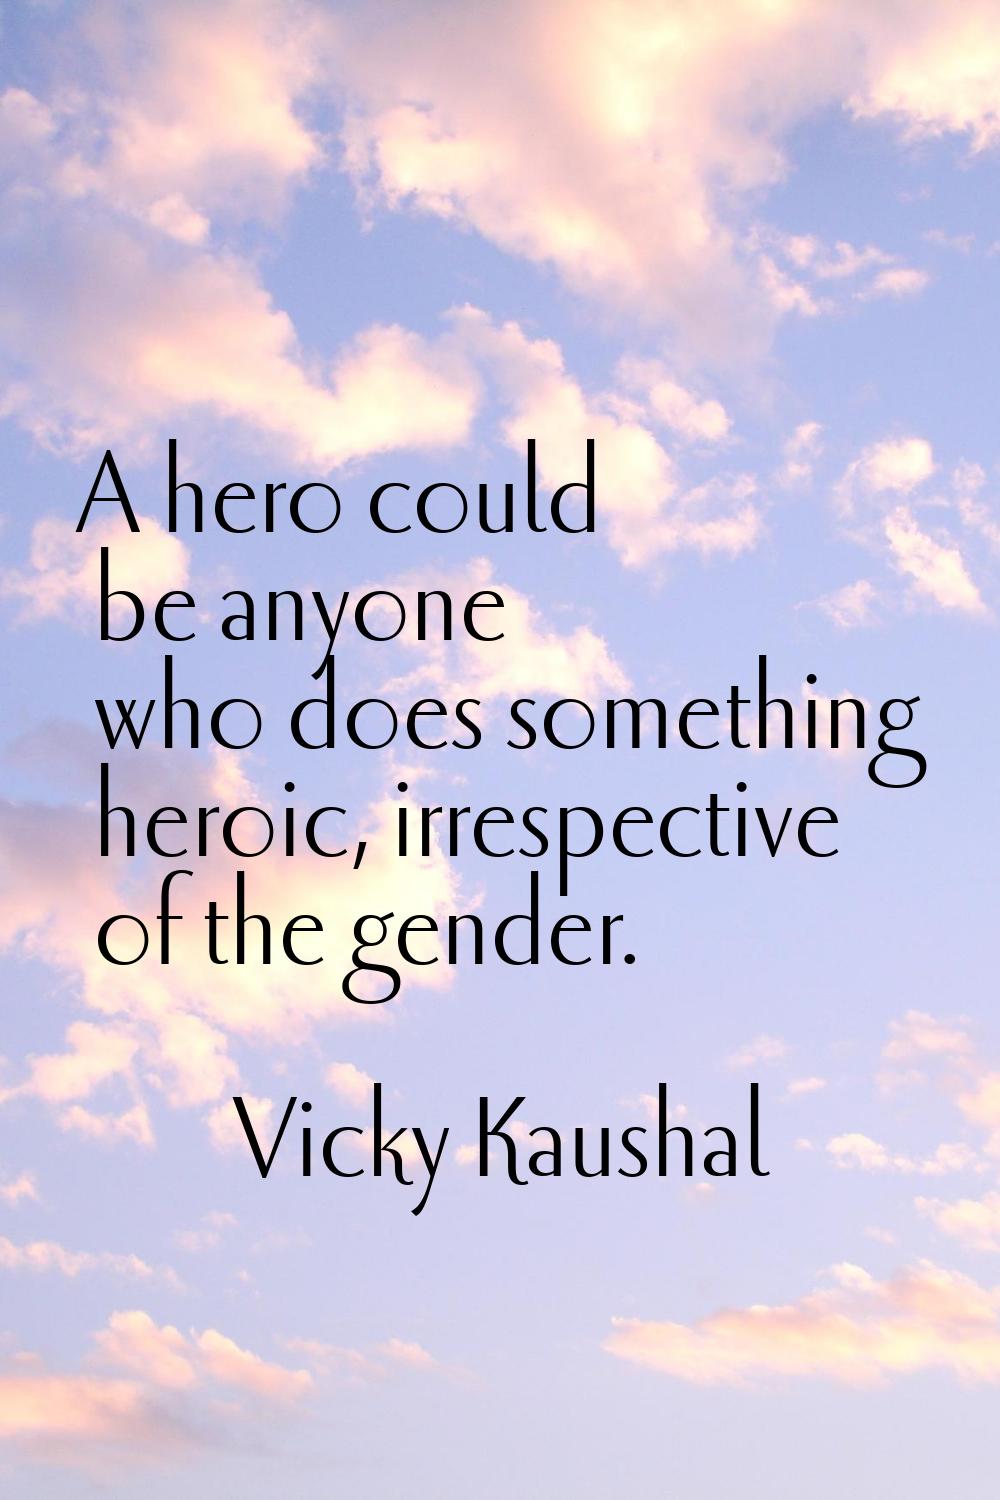 A hero could be anyone who does something heroic, irrespective of the gender.